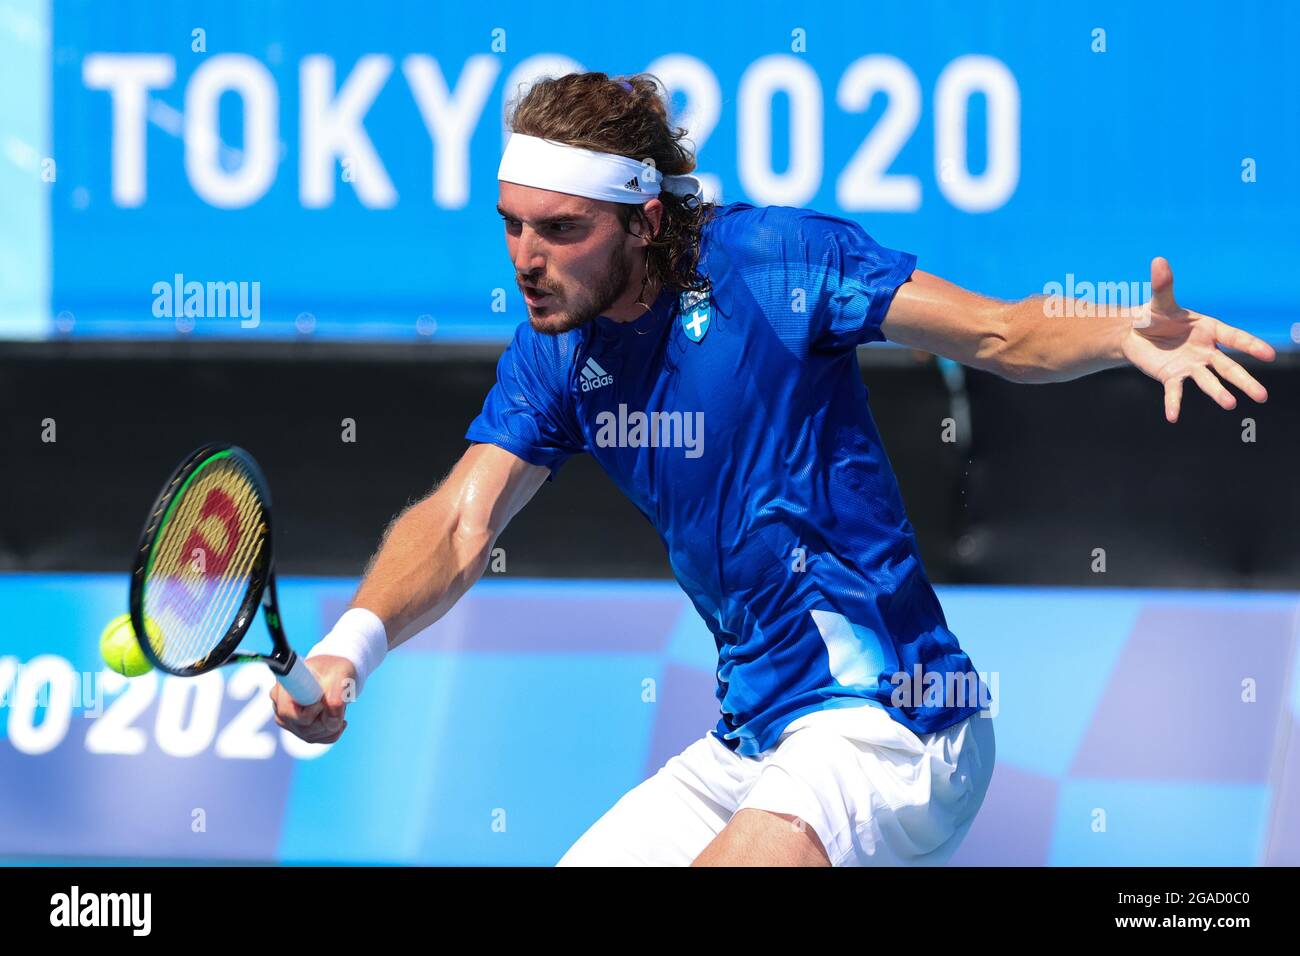 Tokyo, Japan, 28 July, 2021. Stefanos Tsitsipas plays a shot during the Men's Tennis Round 3 match between Ugo Humbert of France and Stefanos Tsitsipas of Greece on Day 5 of the 2020 Tokyo Olympic Games. Credit: Pete Dovgan/Speed Media/Alamy Live News) Stock Photo